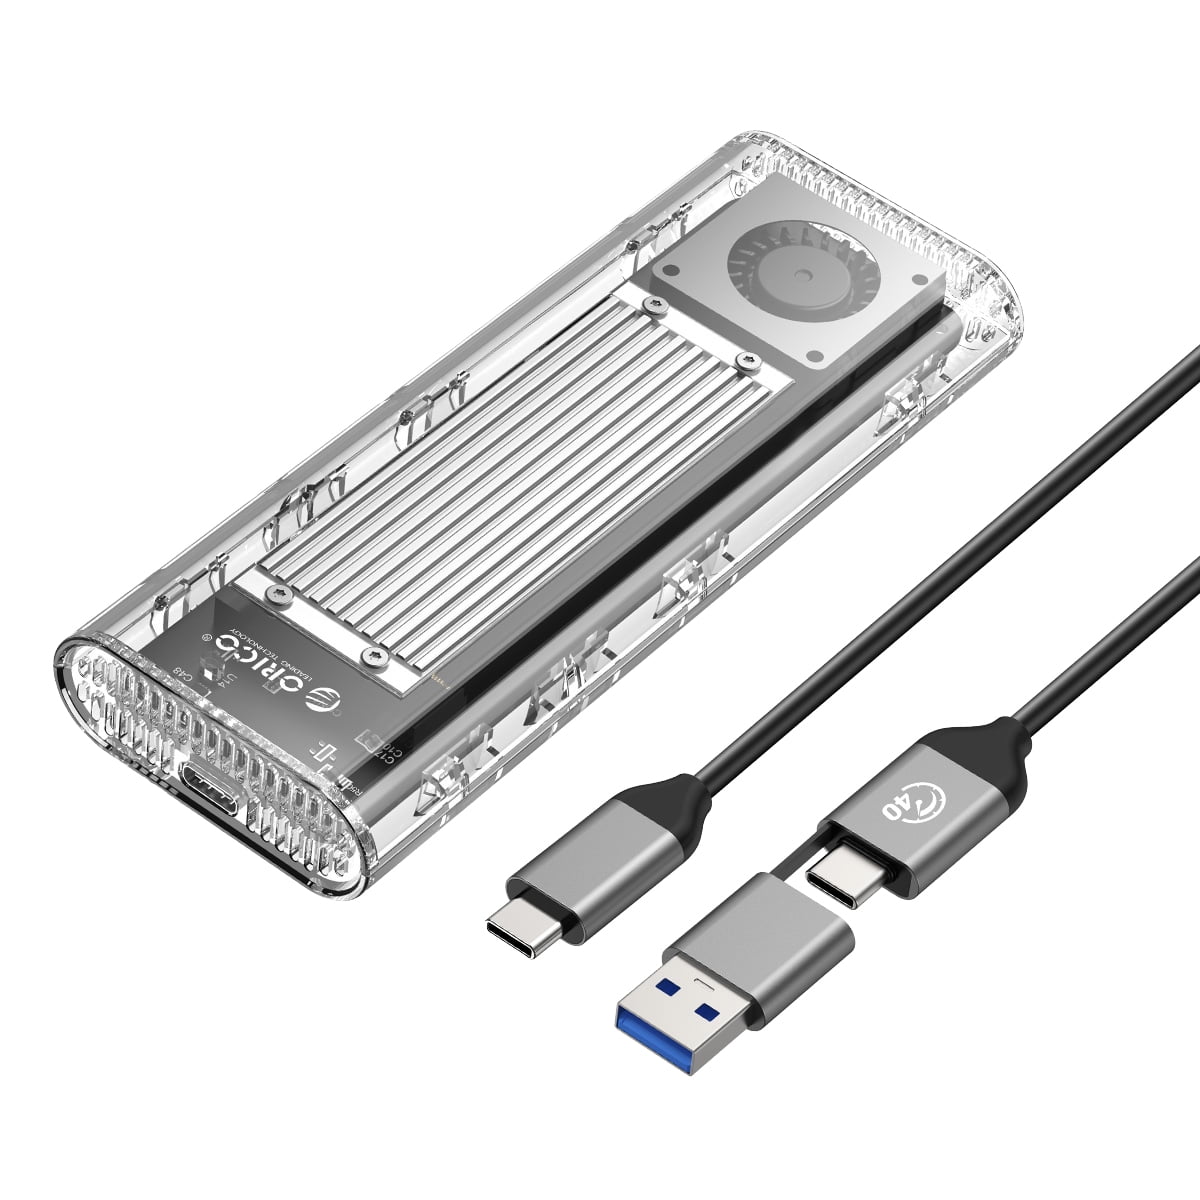 indokinG 40Gbps M.2 NVMe SSD Enclosure Compatible with Thunderbolt